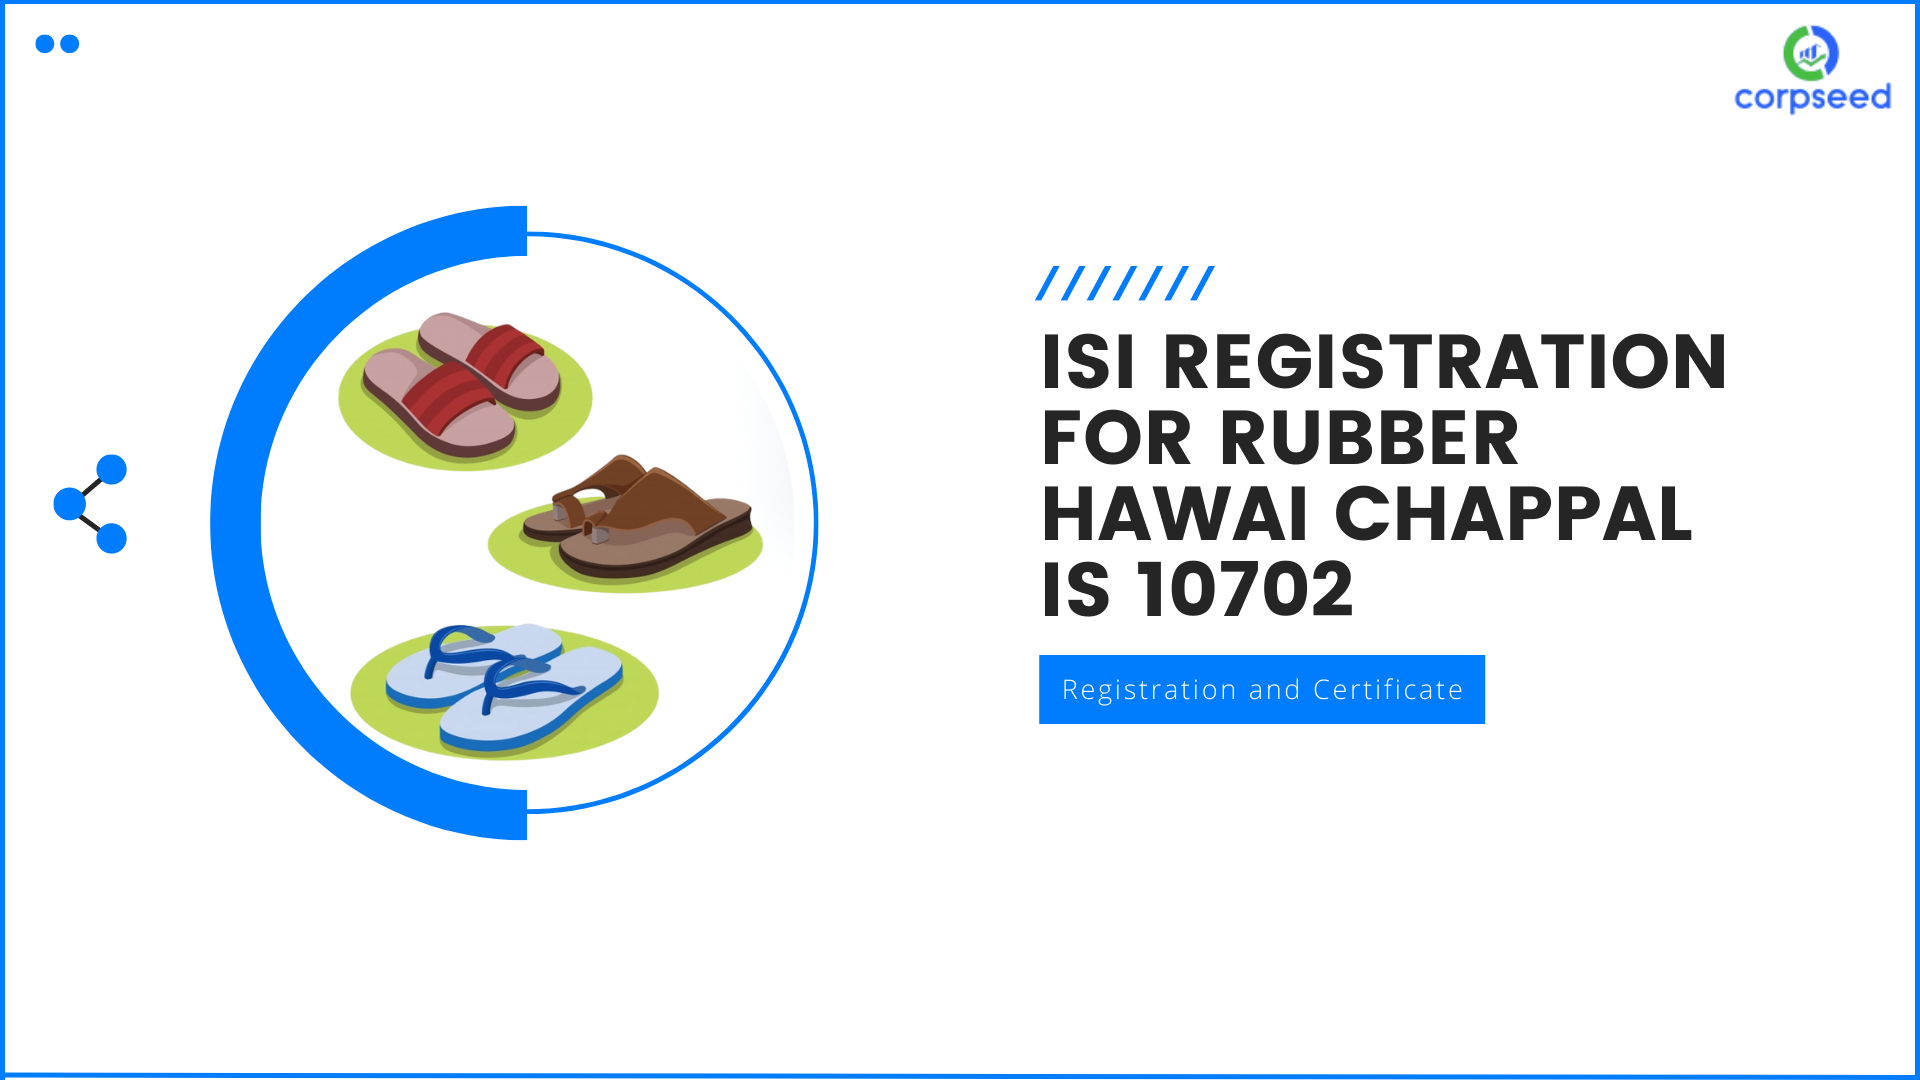 isi-registration-for-rubber-hawai-chappal-is-10702_corpseed.png